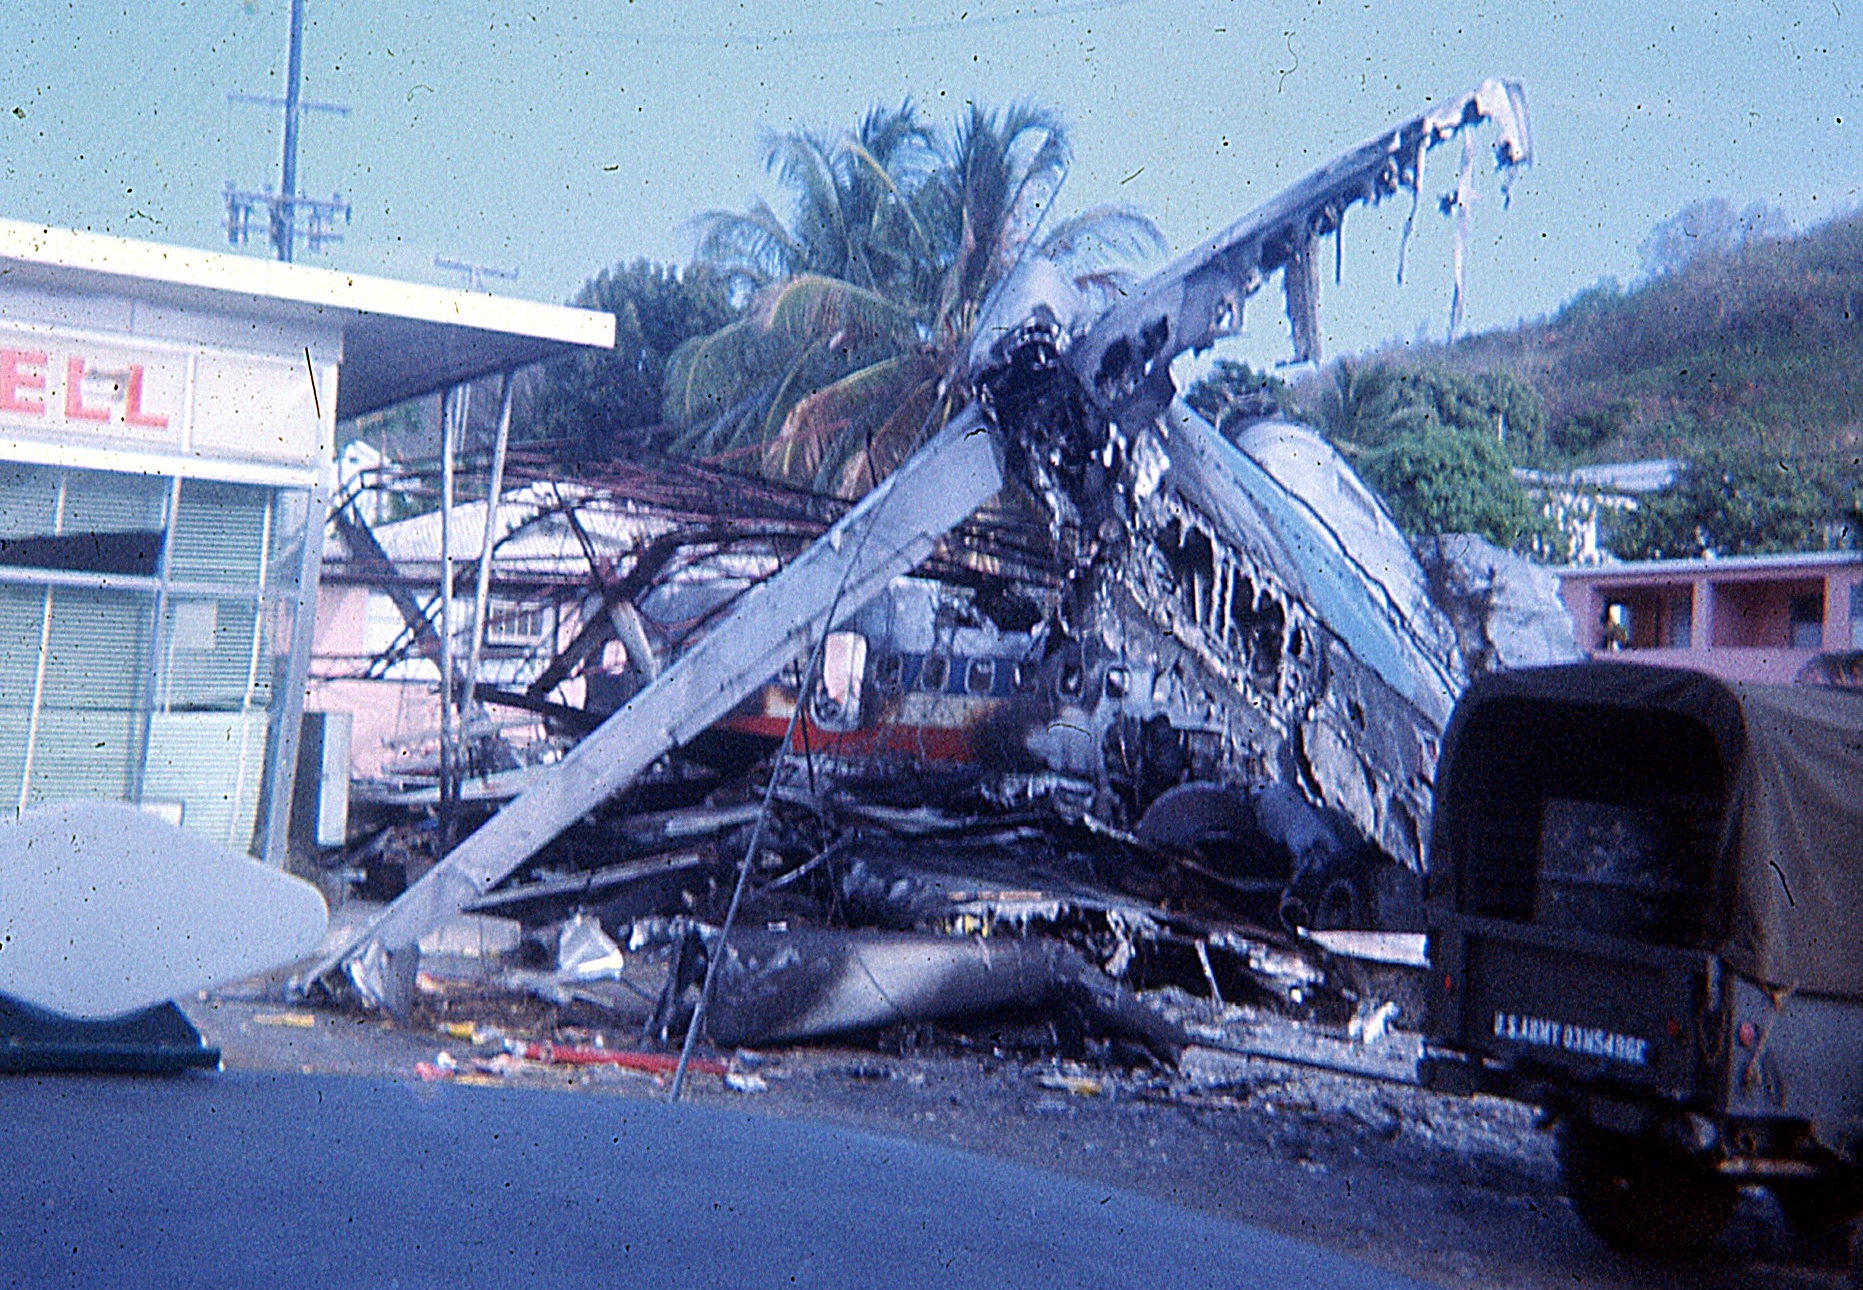 On April 27, 1976, an American Airlines Boeing 727 jetliner, while landing at the Harry S. Truman Airport (now the Cyril E. King Airport) on St. Thomas ran off the end of the runway and crashed into a Shell Gas Station, killing 37 (35 passengers and two flight attendants) of the 88 on board. (Wikipedia photo)